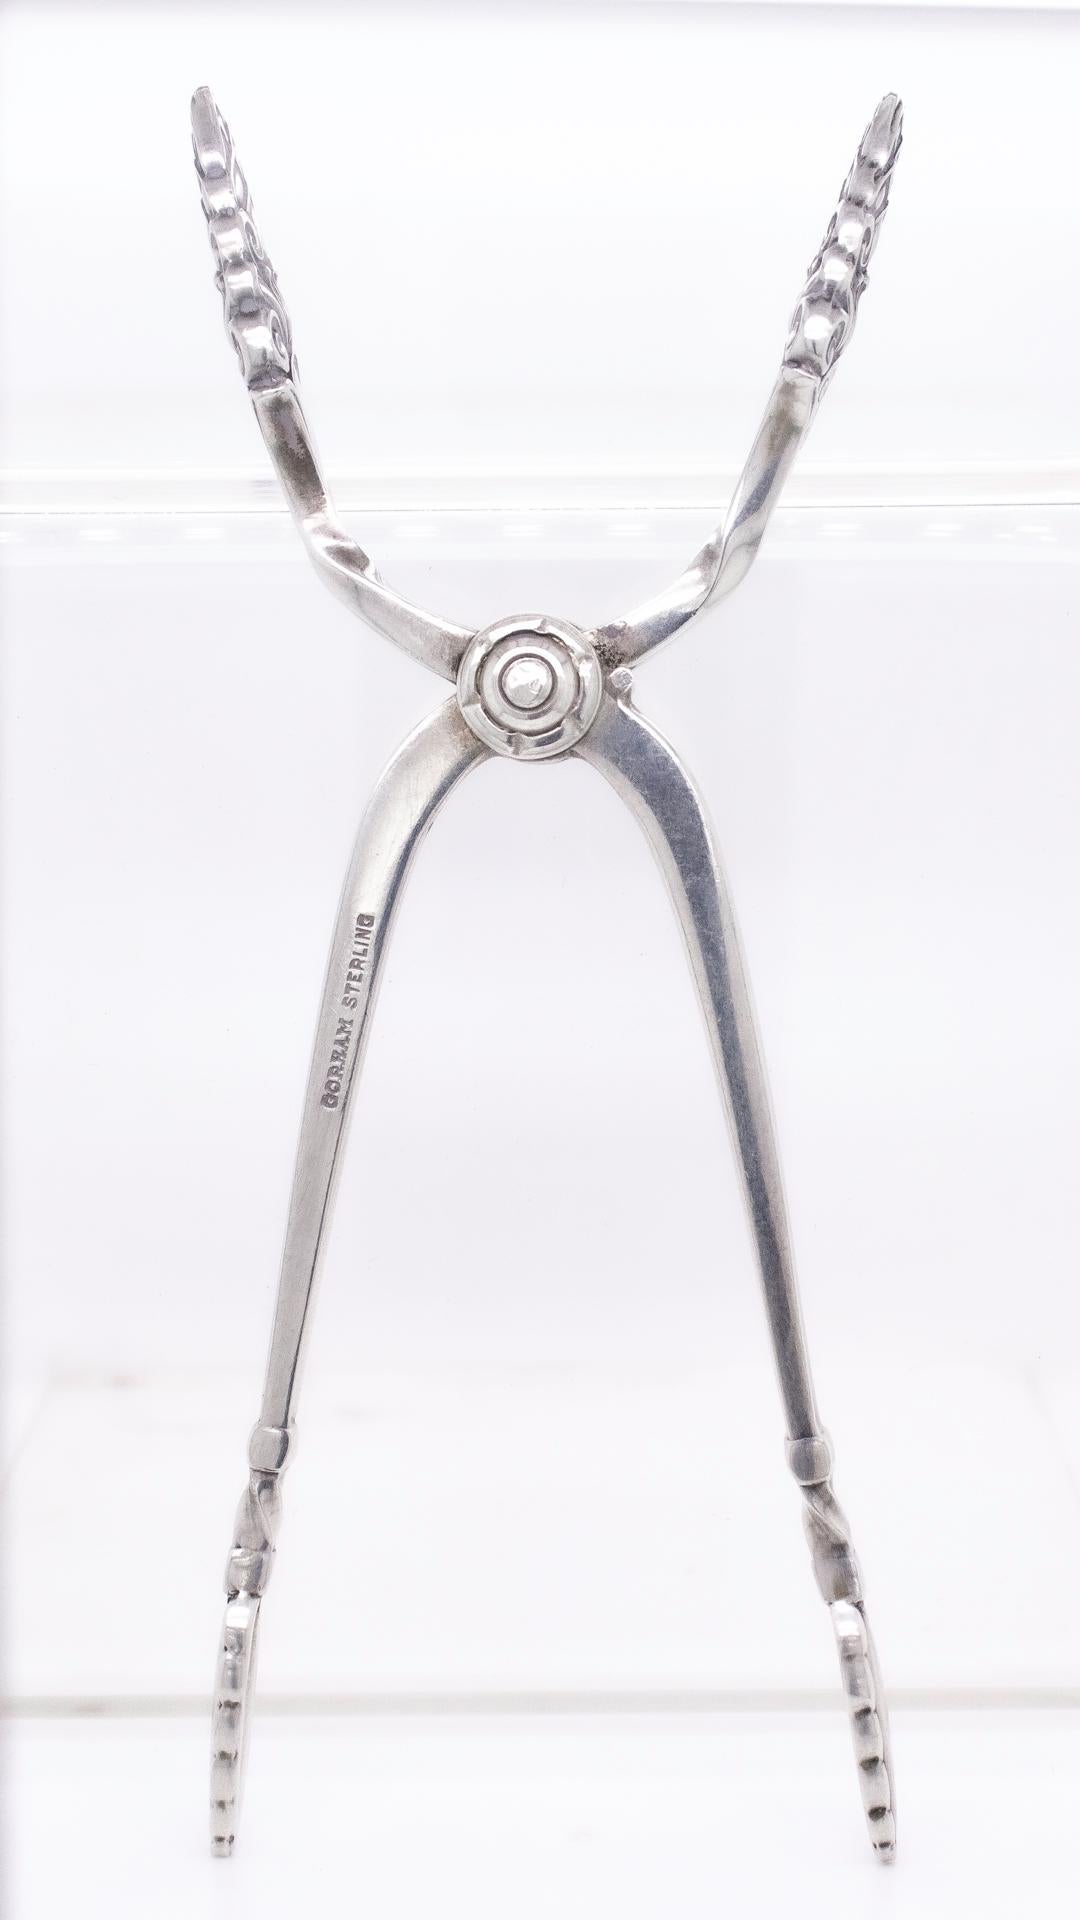 The Modern Modernity Gorham Sterling Silver Old Sovereign Sugar Tongs or Nips (Pince à sucre ou Nips)  en vente 6